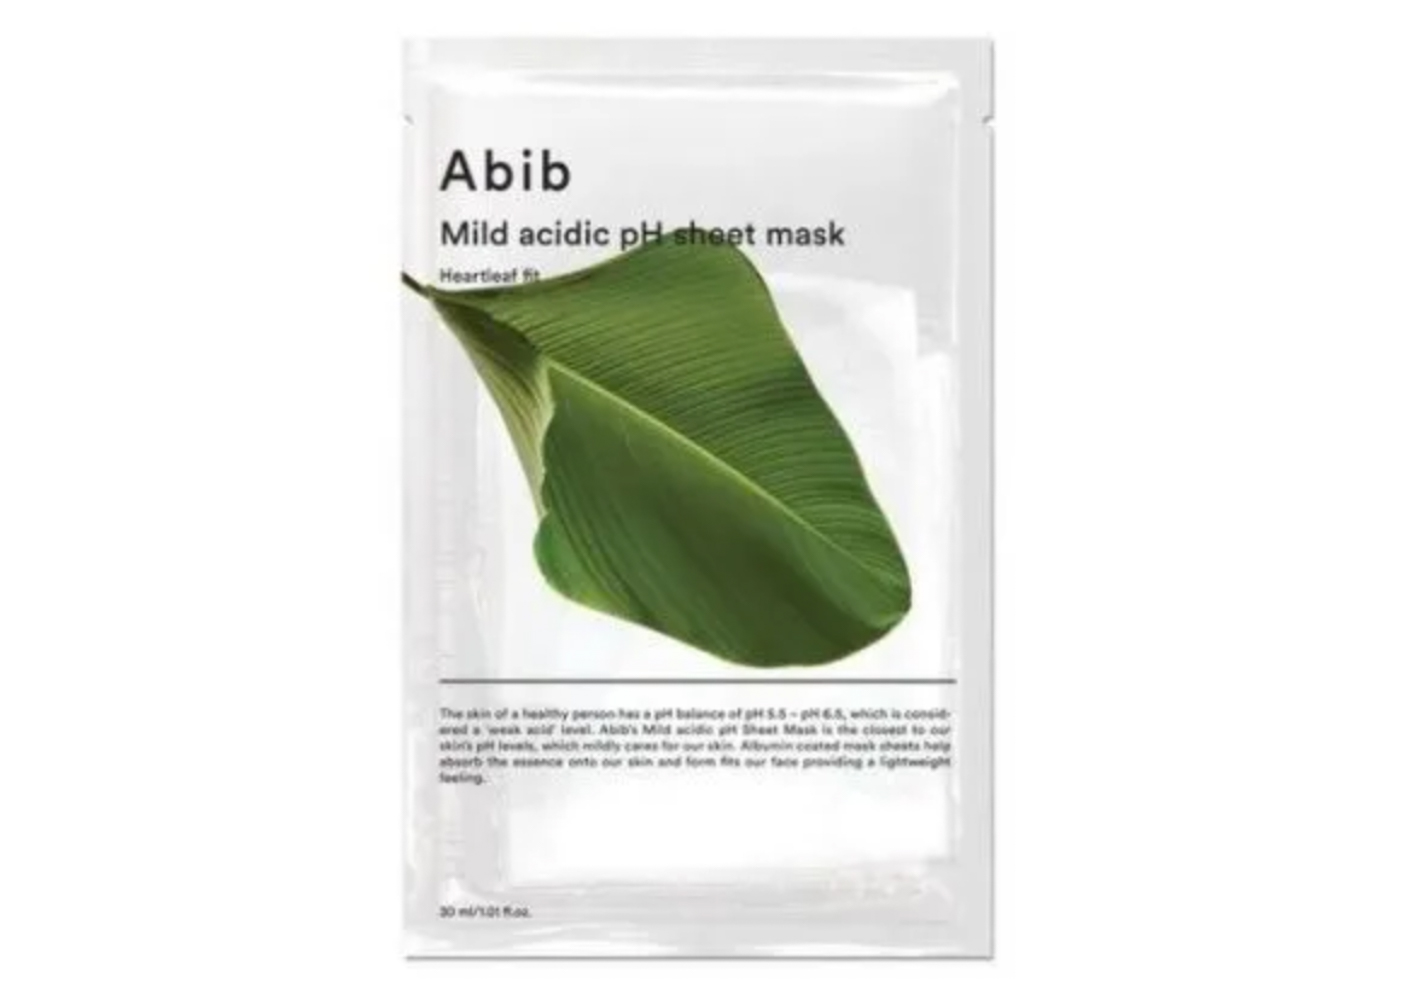 Abib Skincare Review and Product Guide